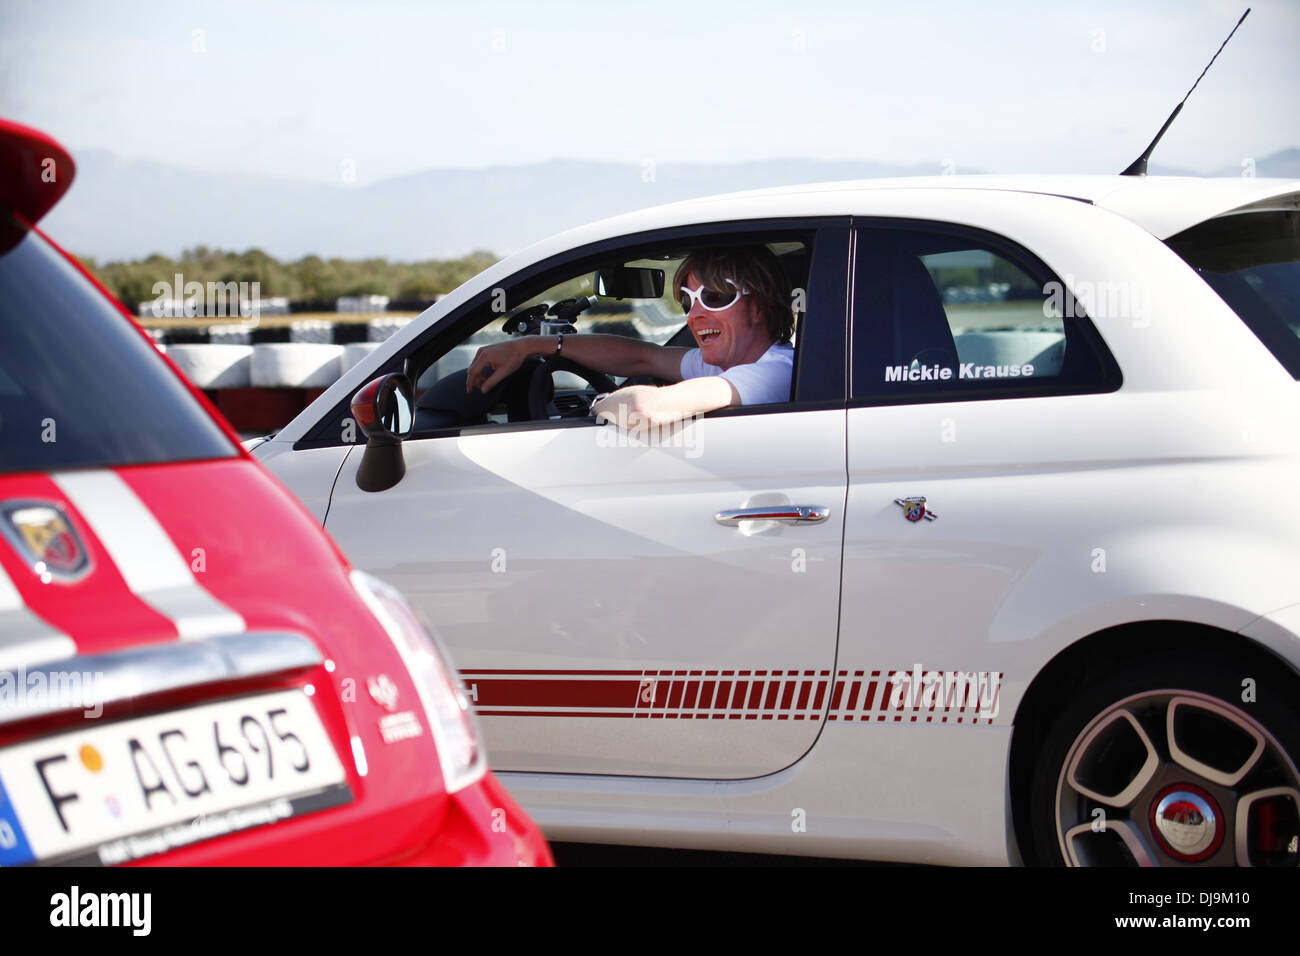 Mickie Krause filming a car race for German VOX TV show 'Promis am Limit' at Circuito Mallorca race track near El Arenal. Majorca, Spain - 08.05.2012 Stock Photo